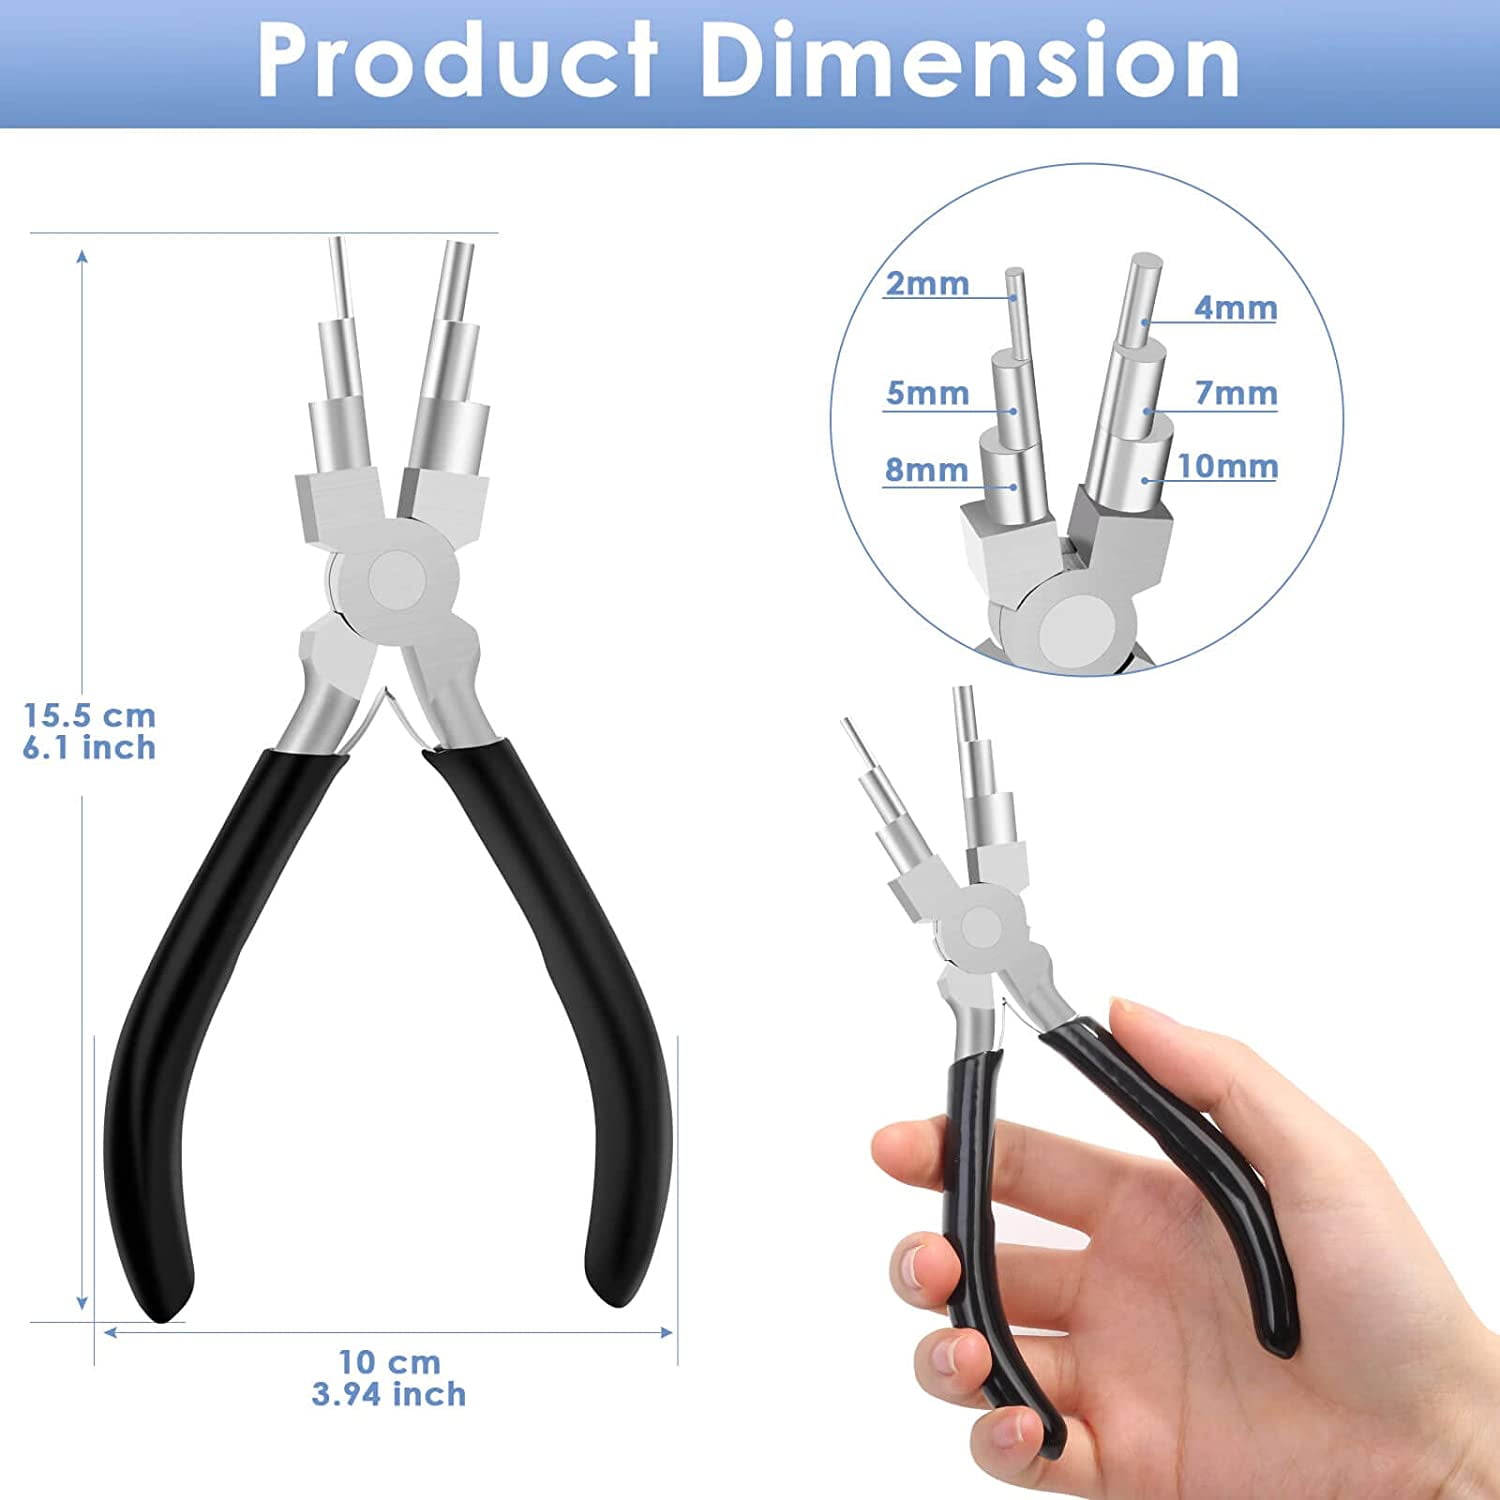 Bent Nose Pliers for Bending and Shaping Wire, 5.5 Inch Jewelry Making Tool  - Soft Flex Company